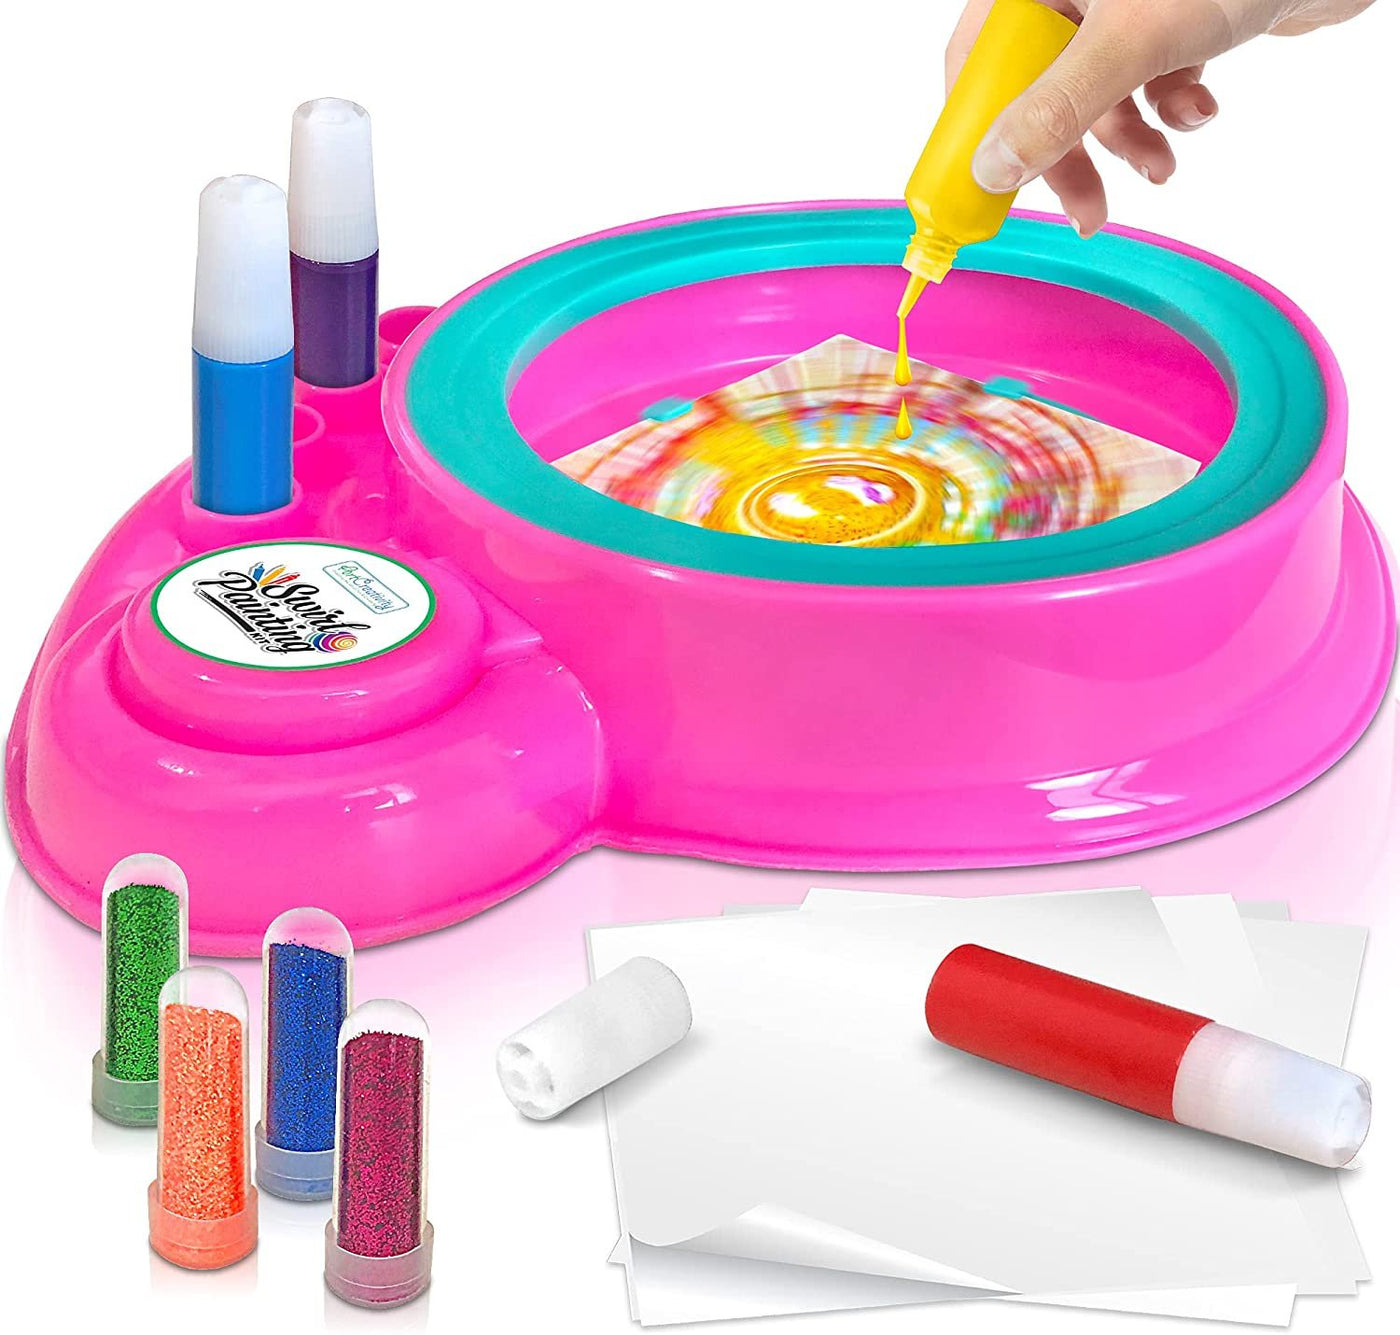 Swirl Painting Kit for Kids, Friction Powered Spin Art Machine, 21 Piece Set, Includes Paint, Glitter, Paper, Spinning Wheel, Engaging Arts & Crafts Activities, No Batteries Required